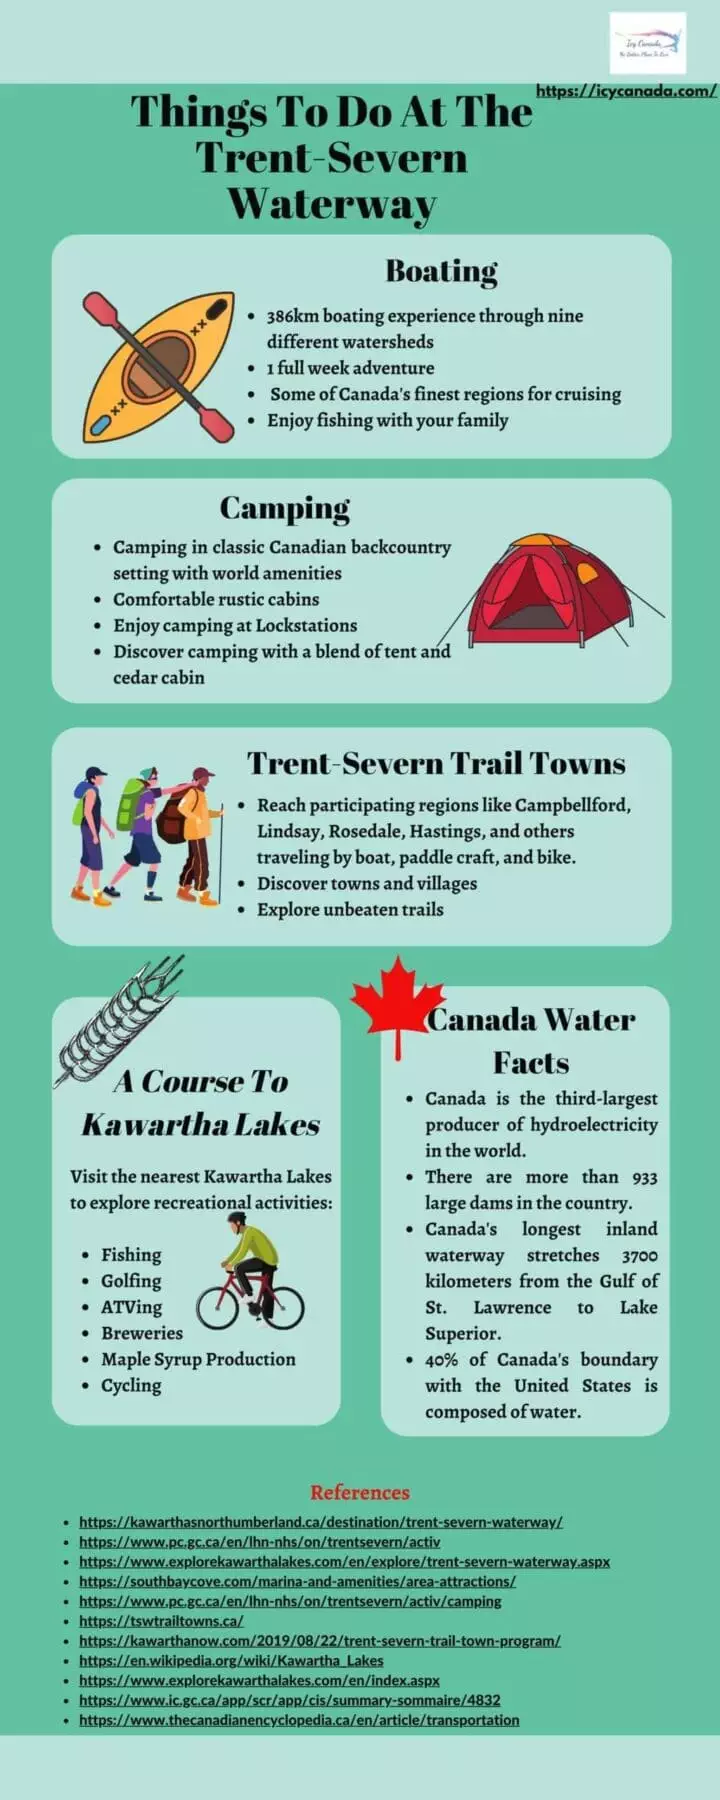 Things To Do At Trent Severn